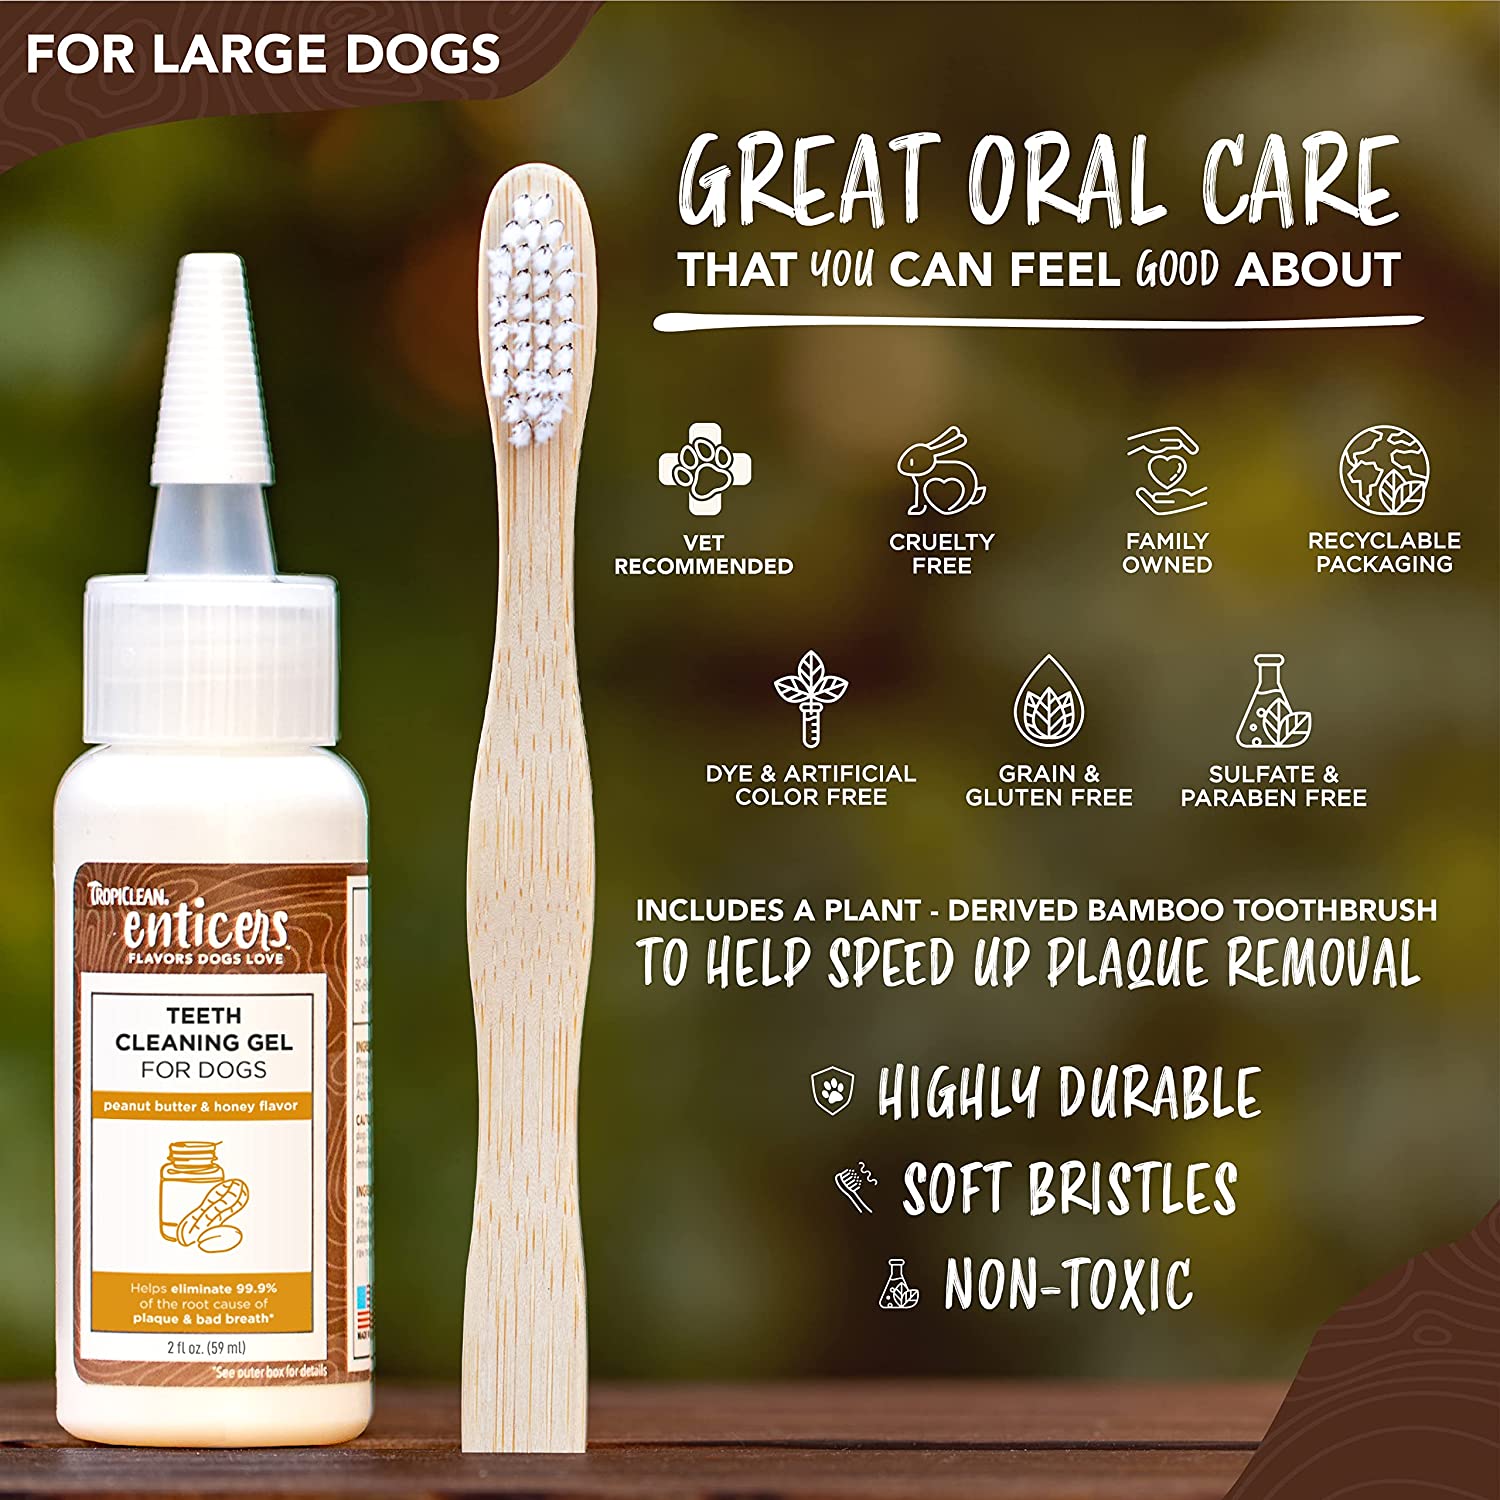 TropiClean Enticers Teeth Cleaning Gel for Dogs - Dental Gel - Helps Fight Plaque & Bad Breath - Flavors Dogs Love - No Brushing Required